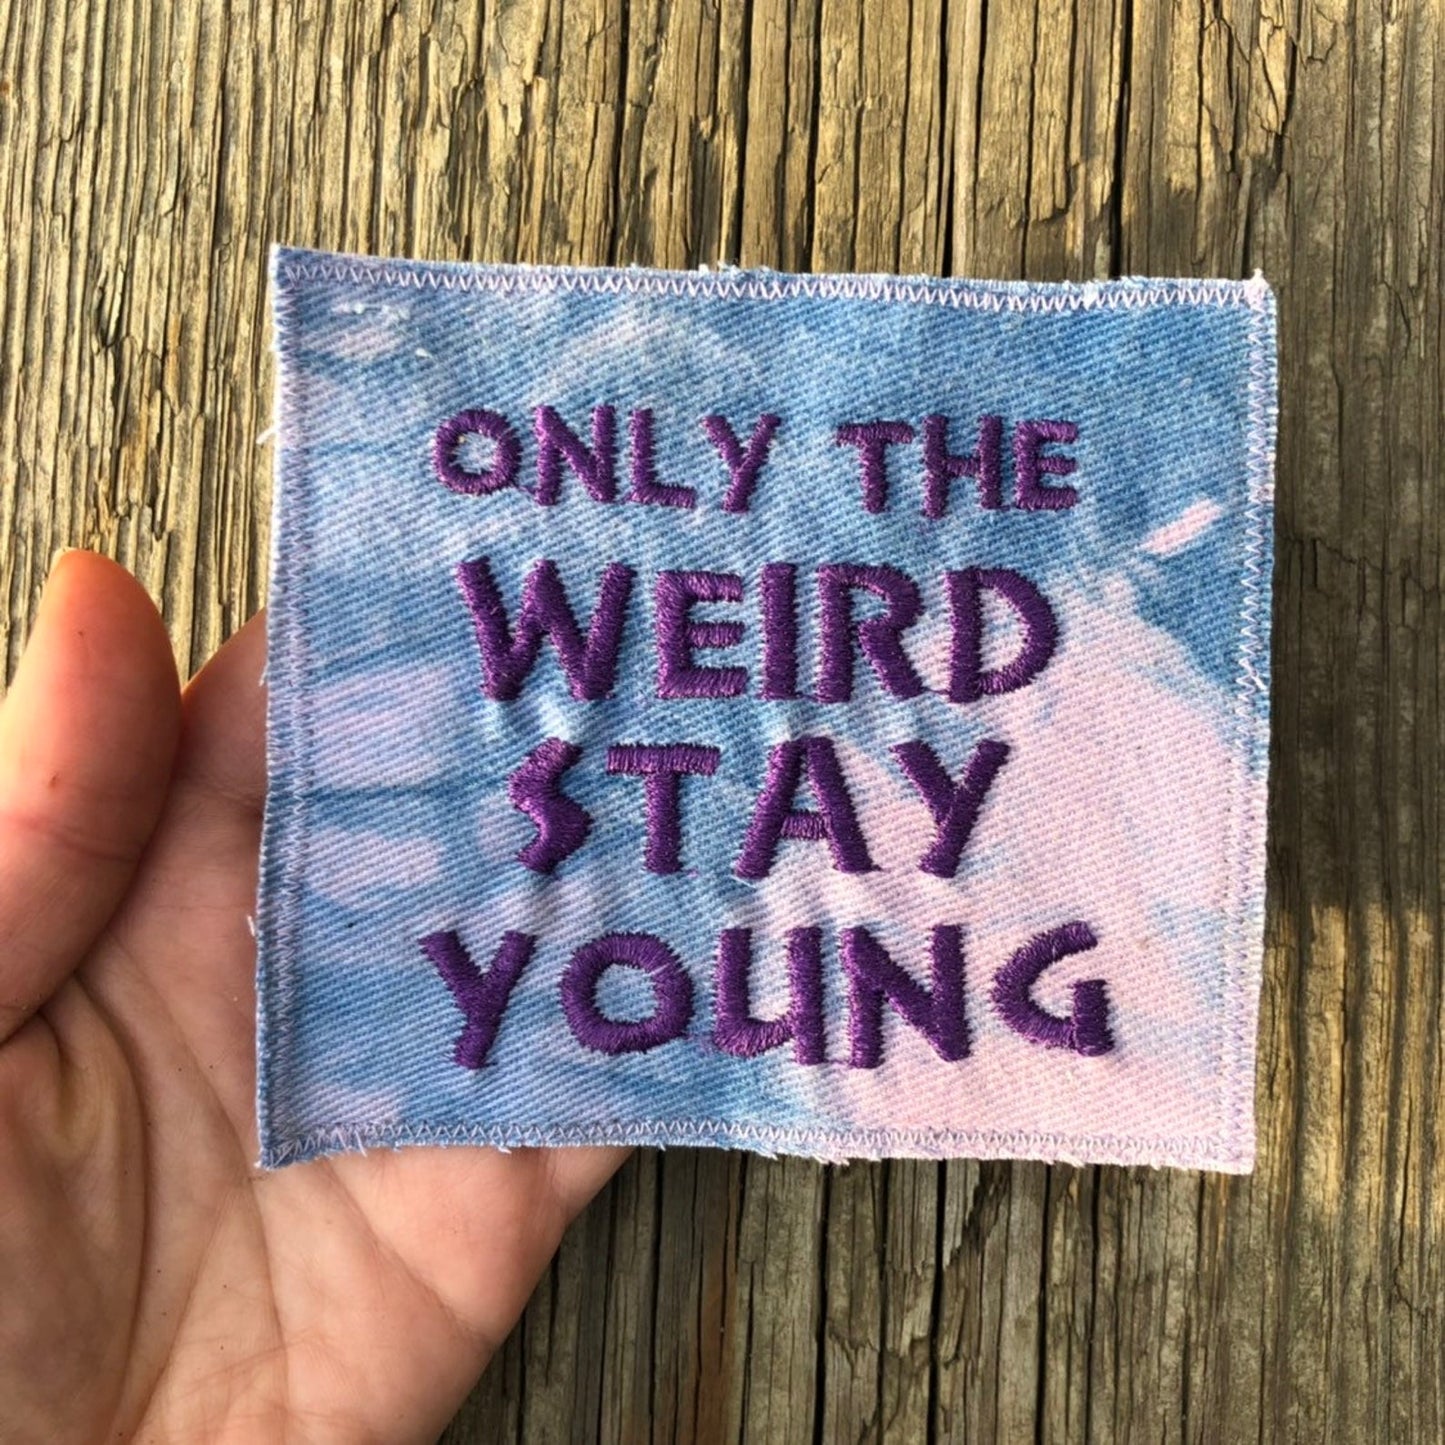 Only The Weird Stay Young. Tie Dye Handmade Canvas Patch